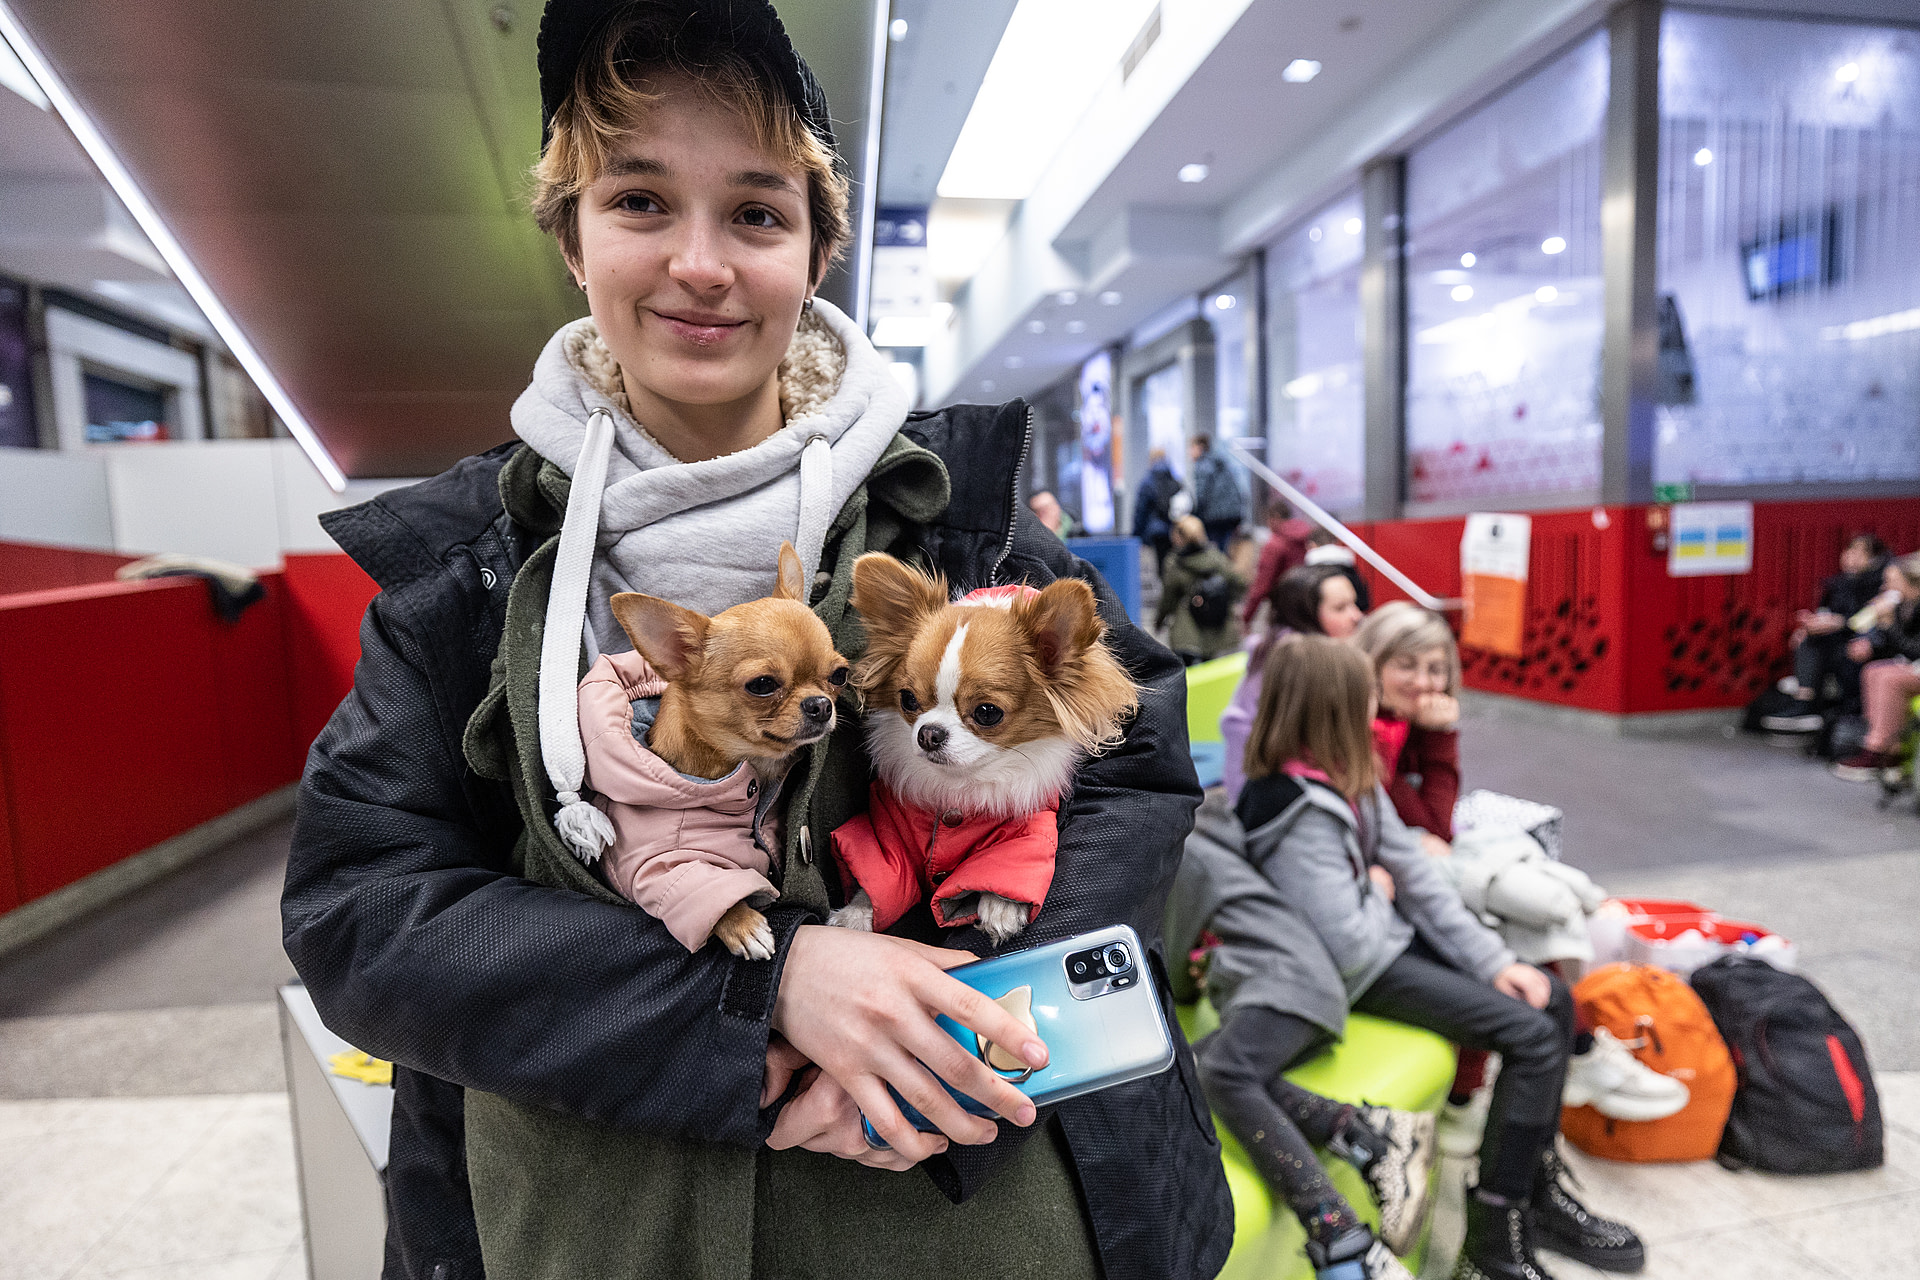 Tatiana, a young Ukrainian refugee, carries two small dogs though the train station in Kraków. They escaped from Kharkiv and are heading to Spain.